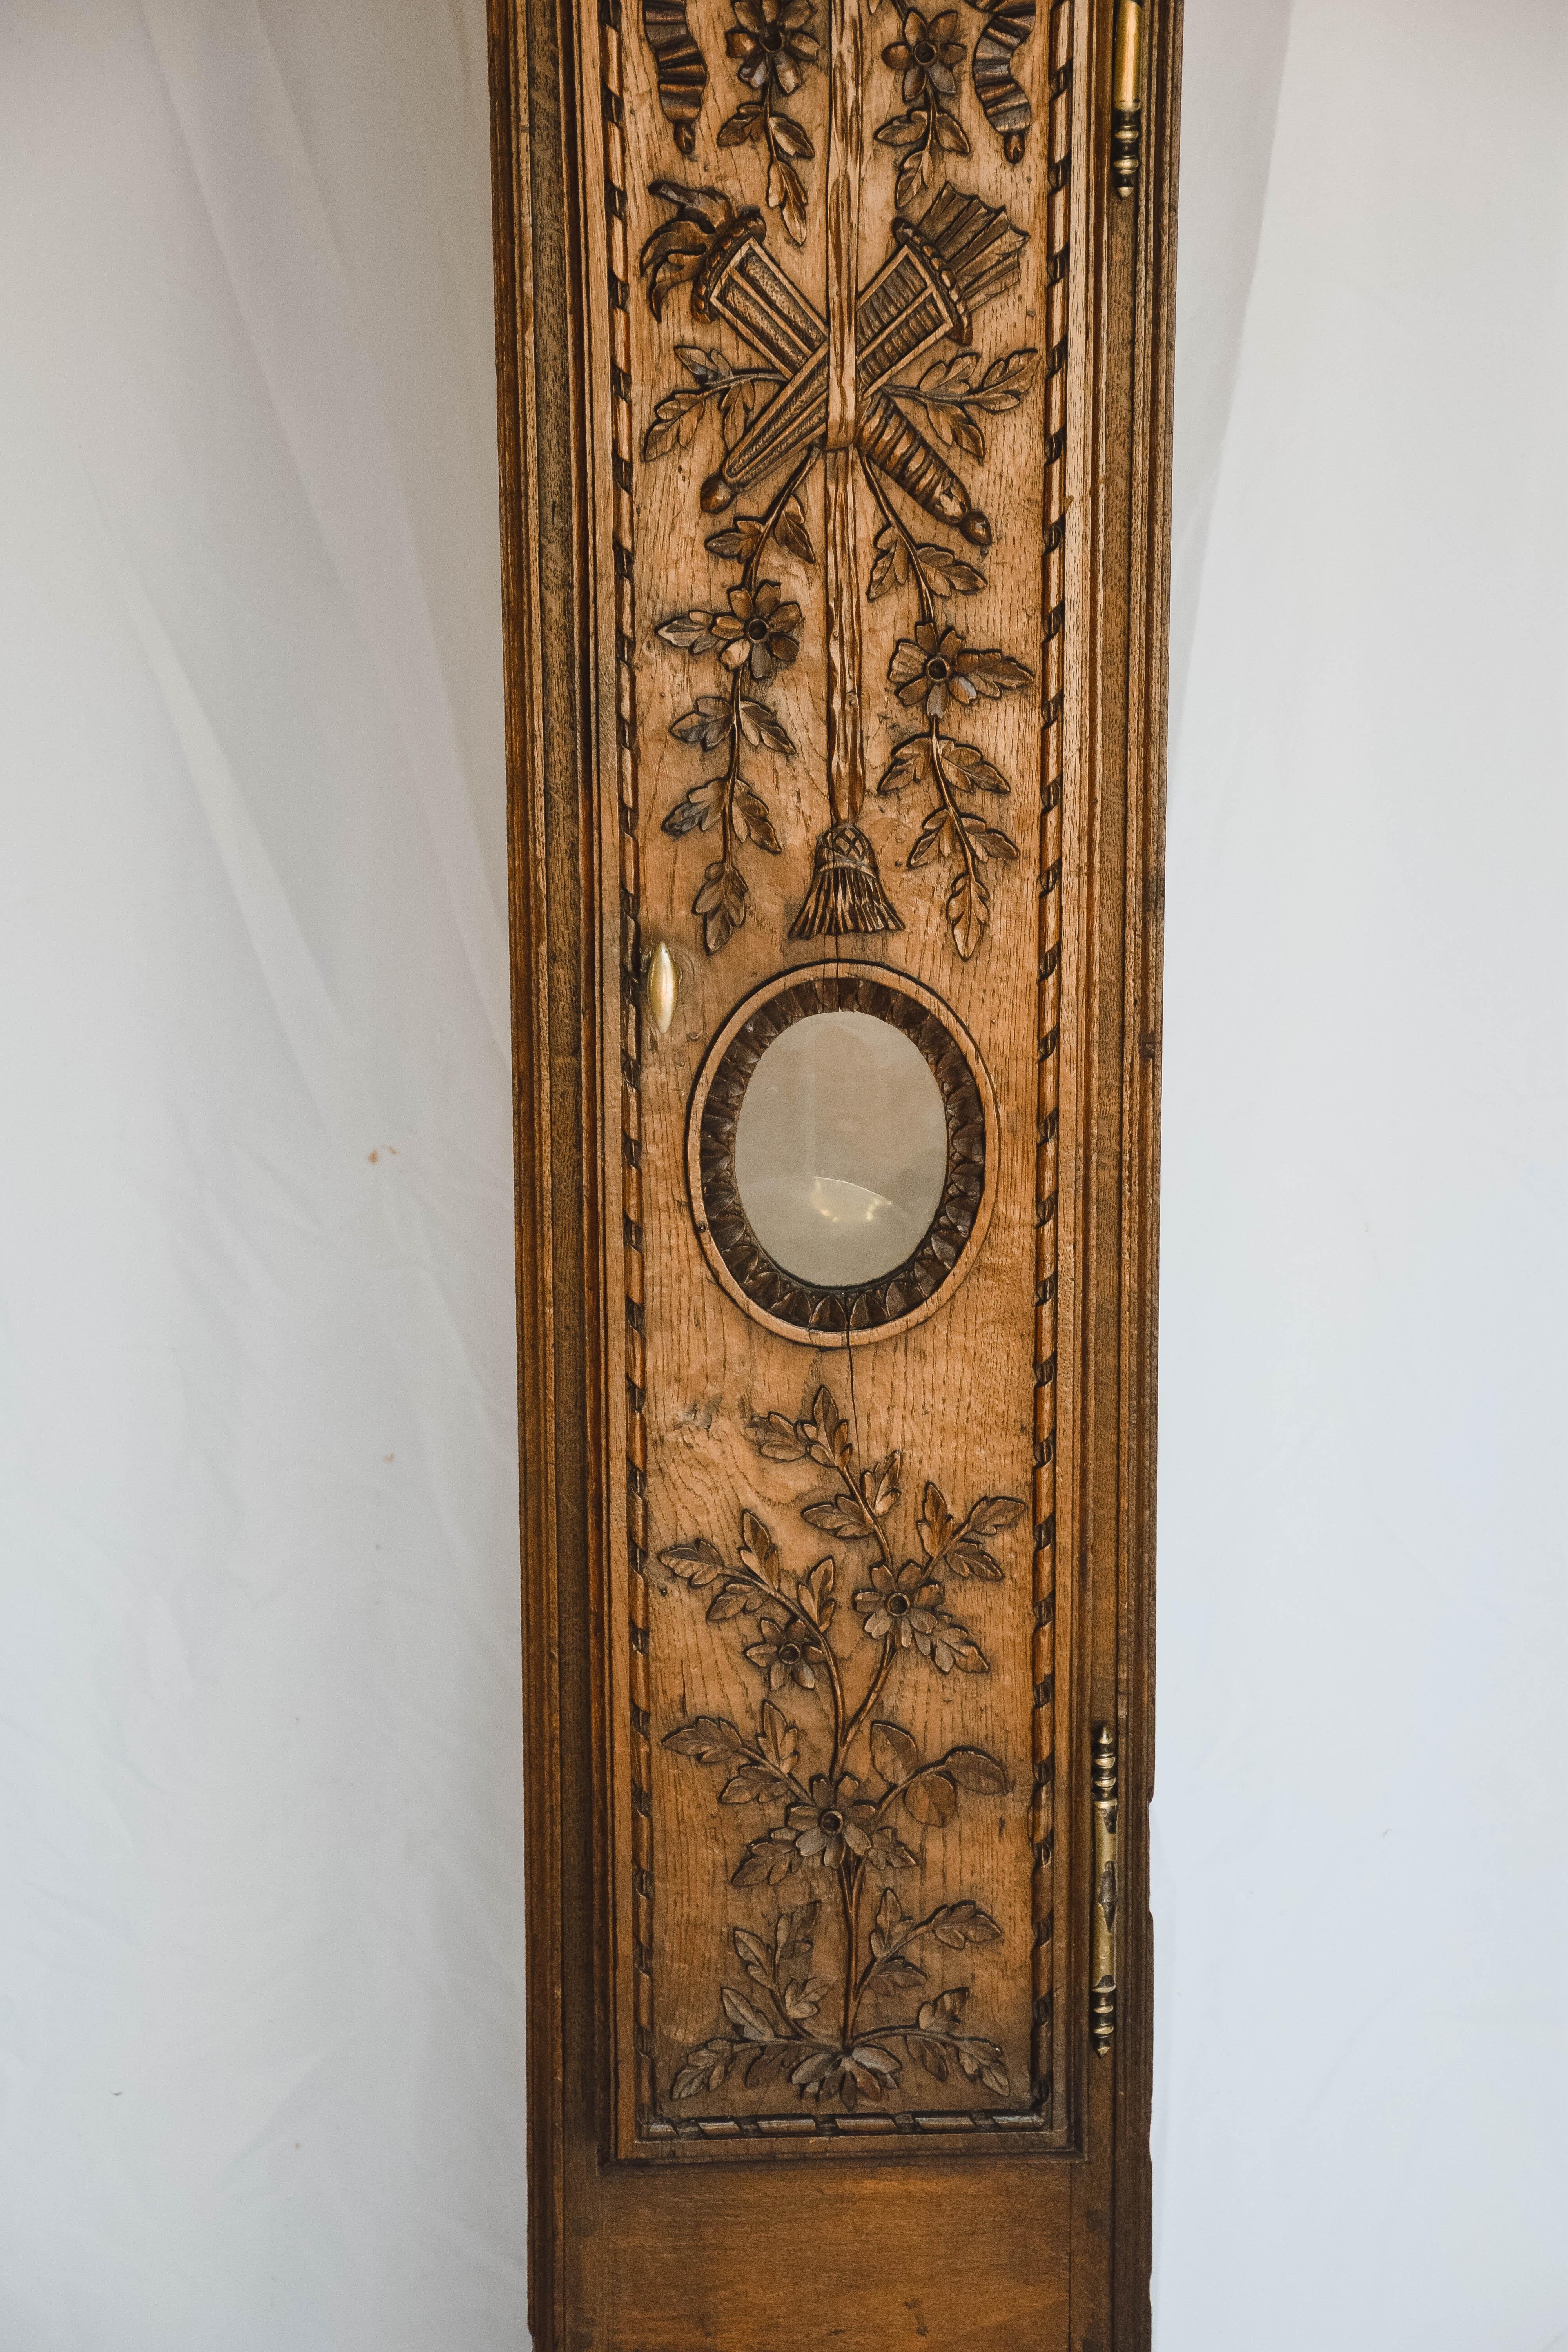 Other Superb Carved 18th c French Lantern Clock Case with Movement